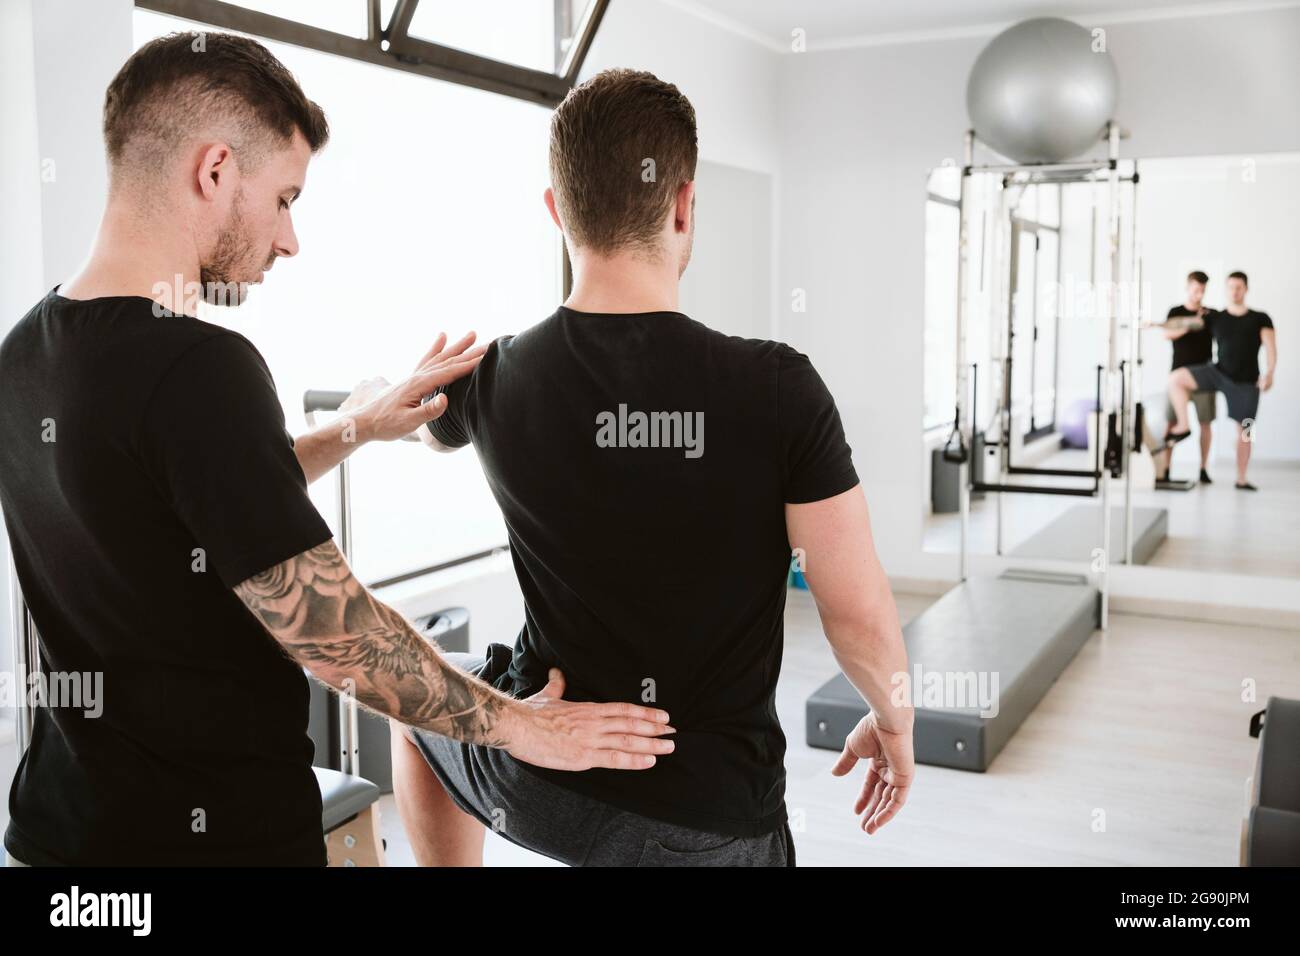 Male instructor providing support to man while exercising at pilates studio Stock Photo